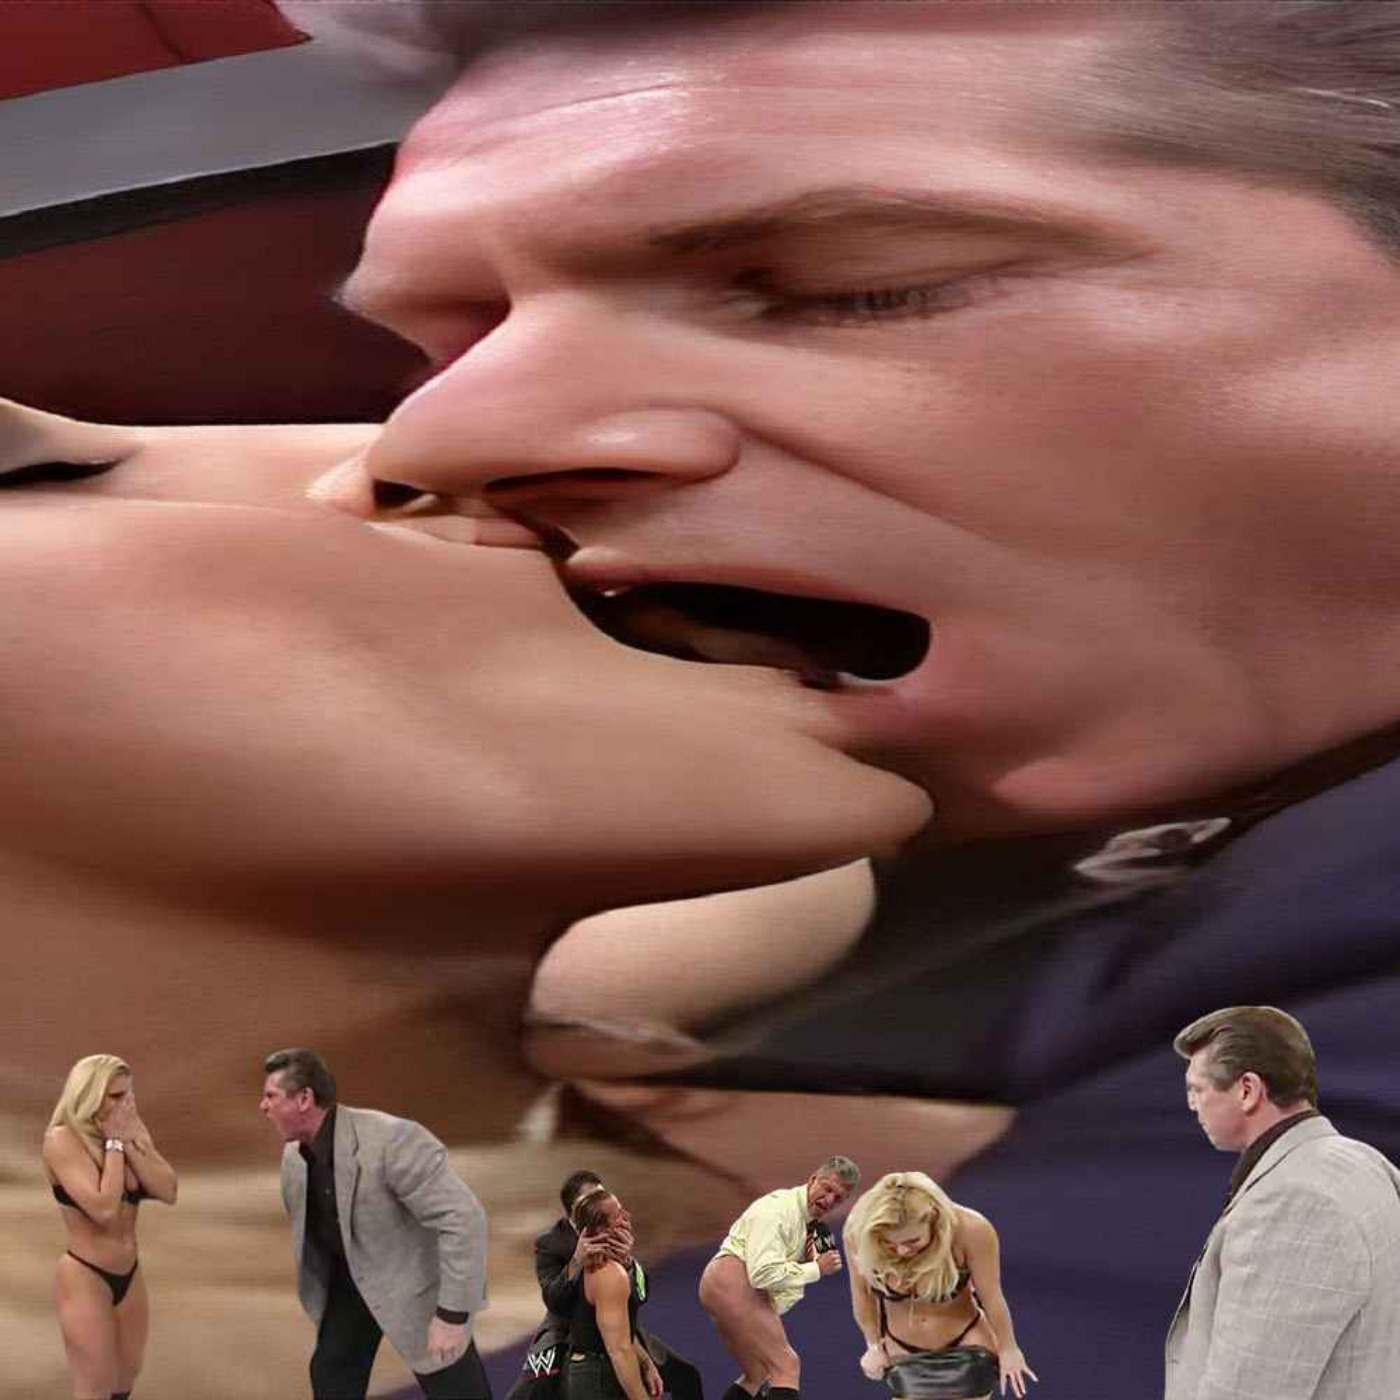 Vince McMahon Sexual Assault Scandal Presented by 1Starr Sports